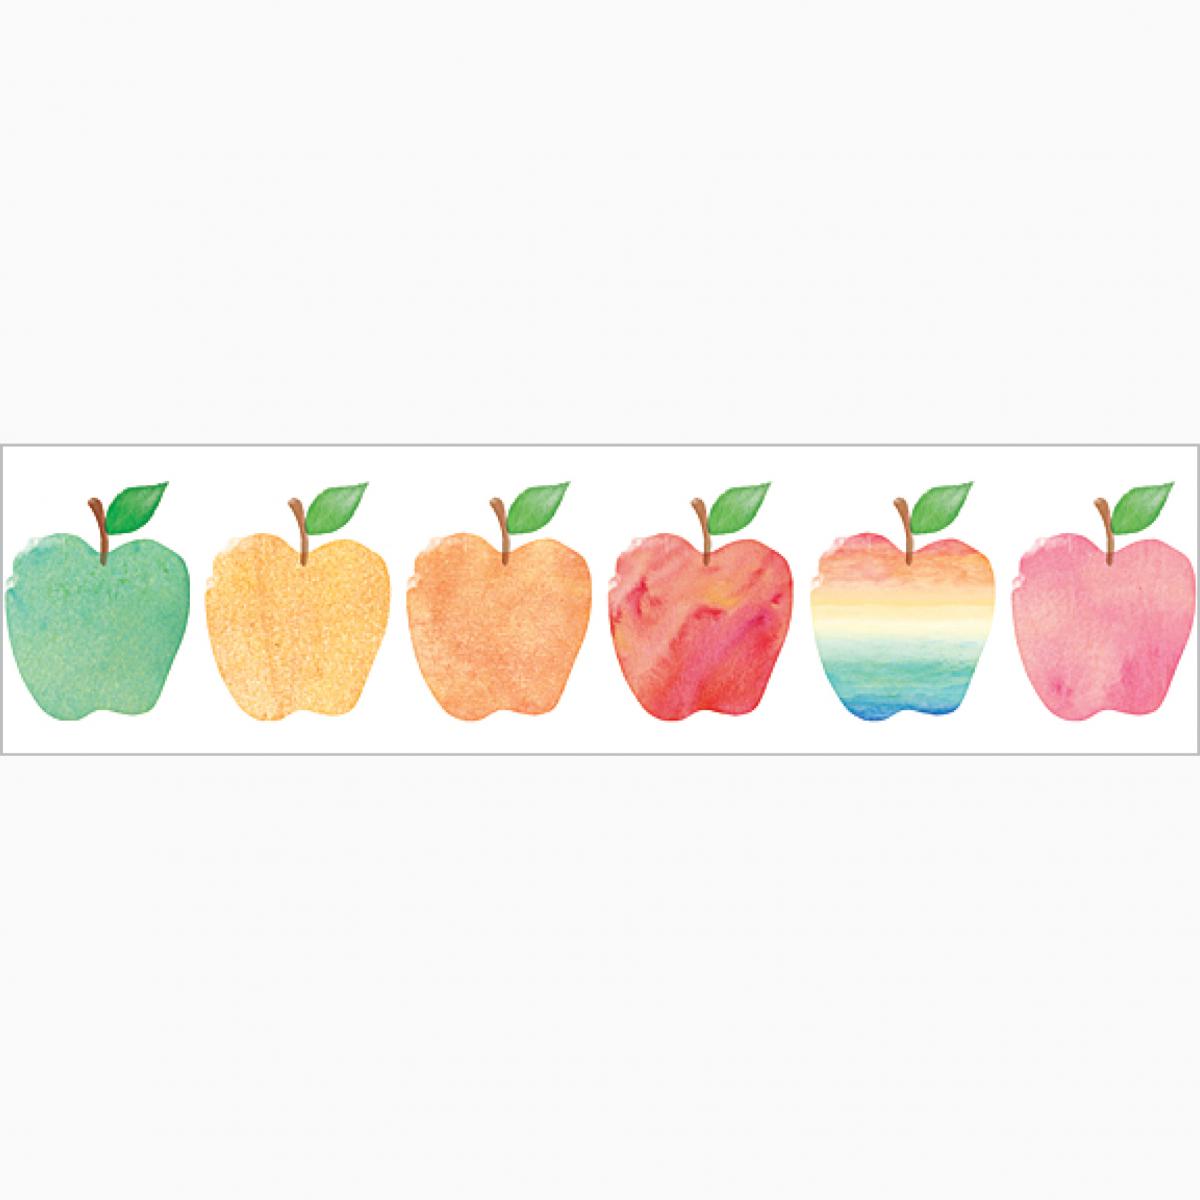  Watercolor Apples Border Trimmer 